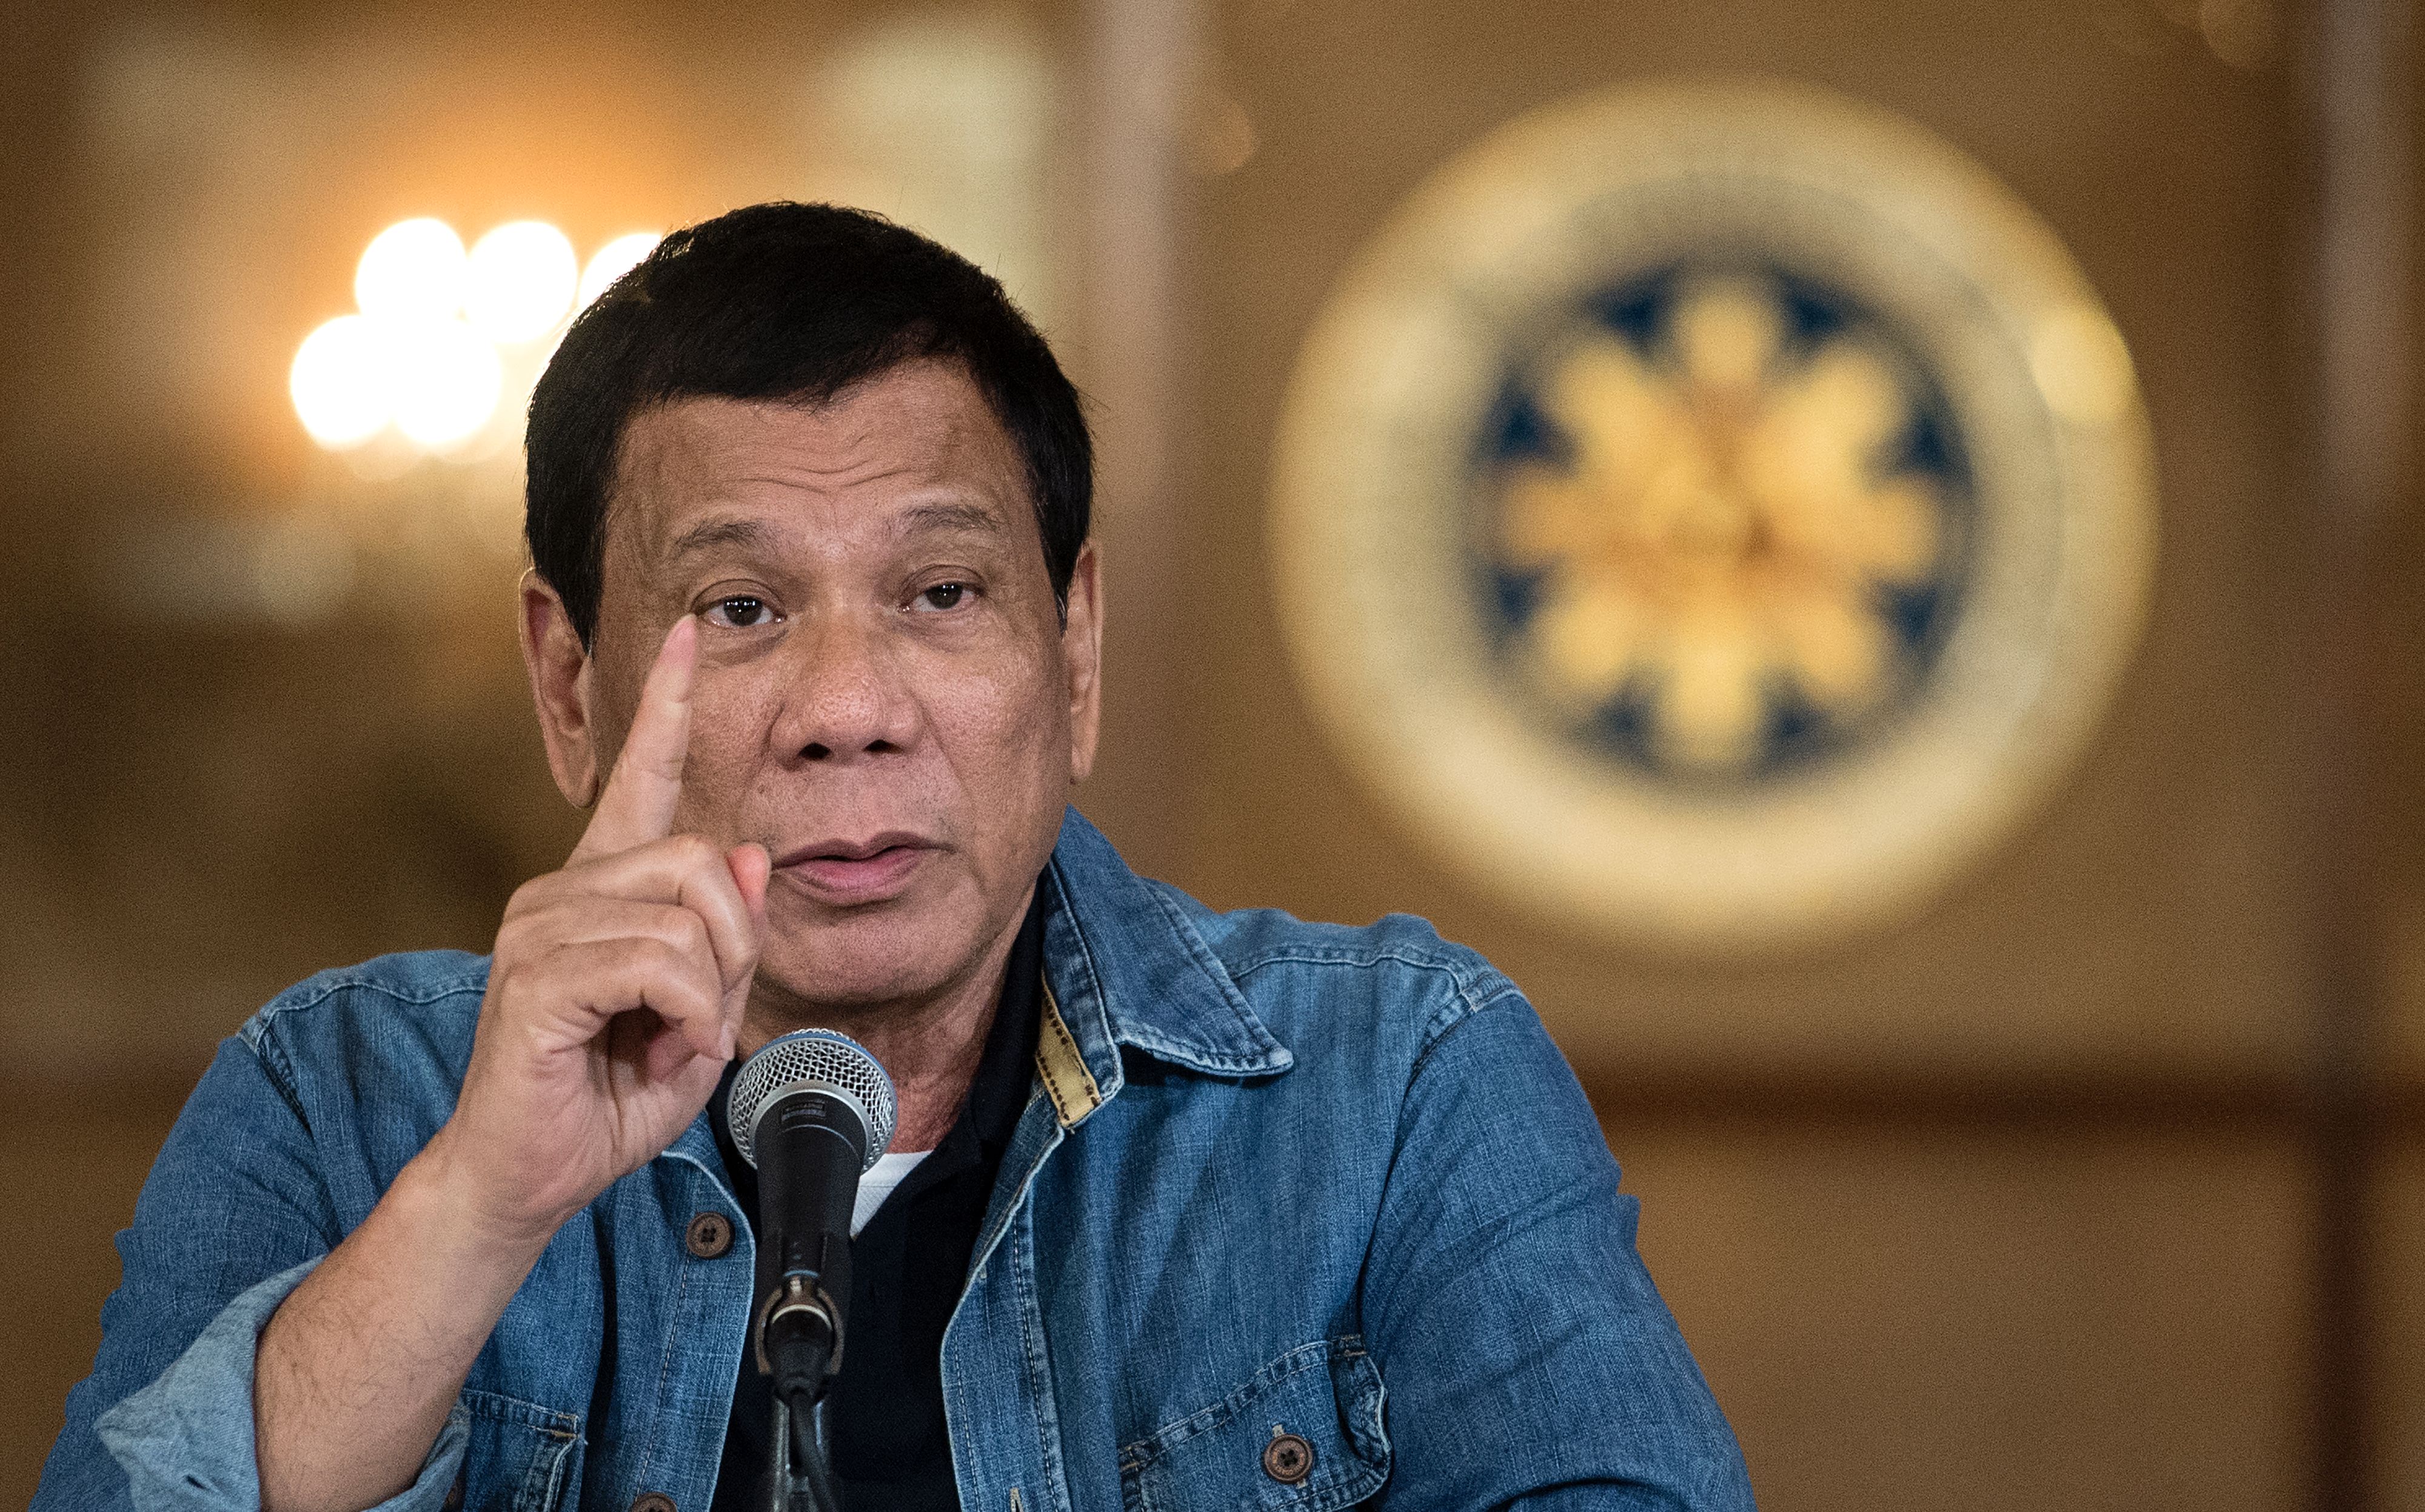 Philippine's President Rodrigo Duterte gestures as he answers a question during a press conference at the Malacanang palace in Manila on January 30, 2017. (Noel Celis—AFP/Getty Images)